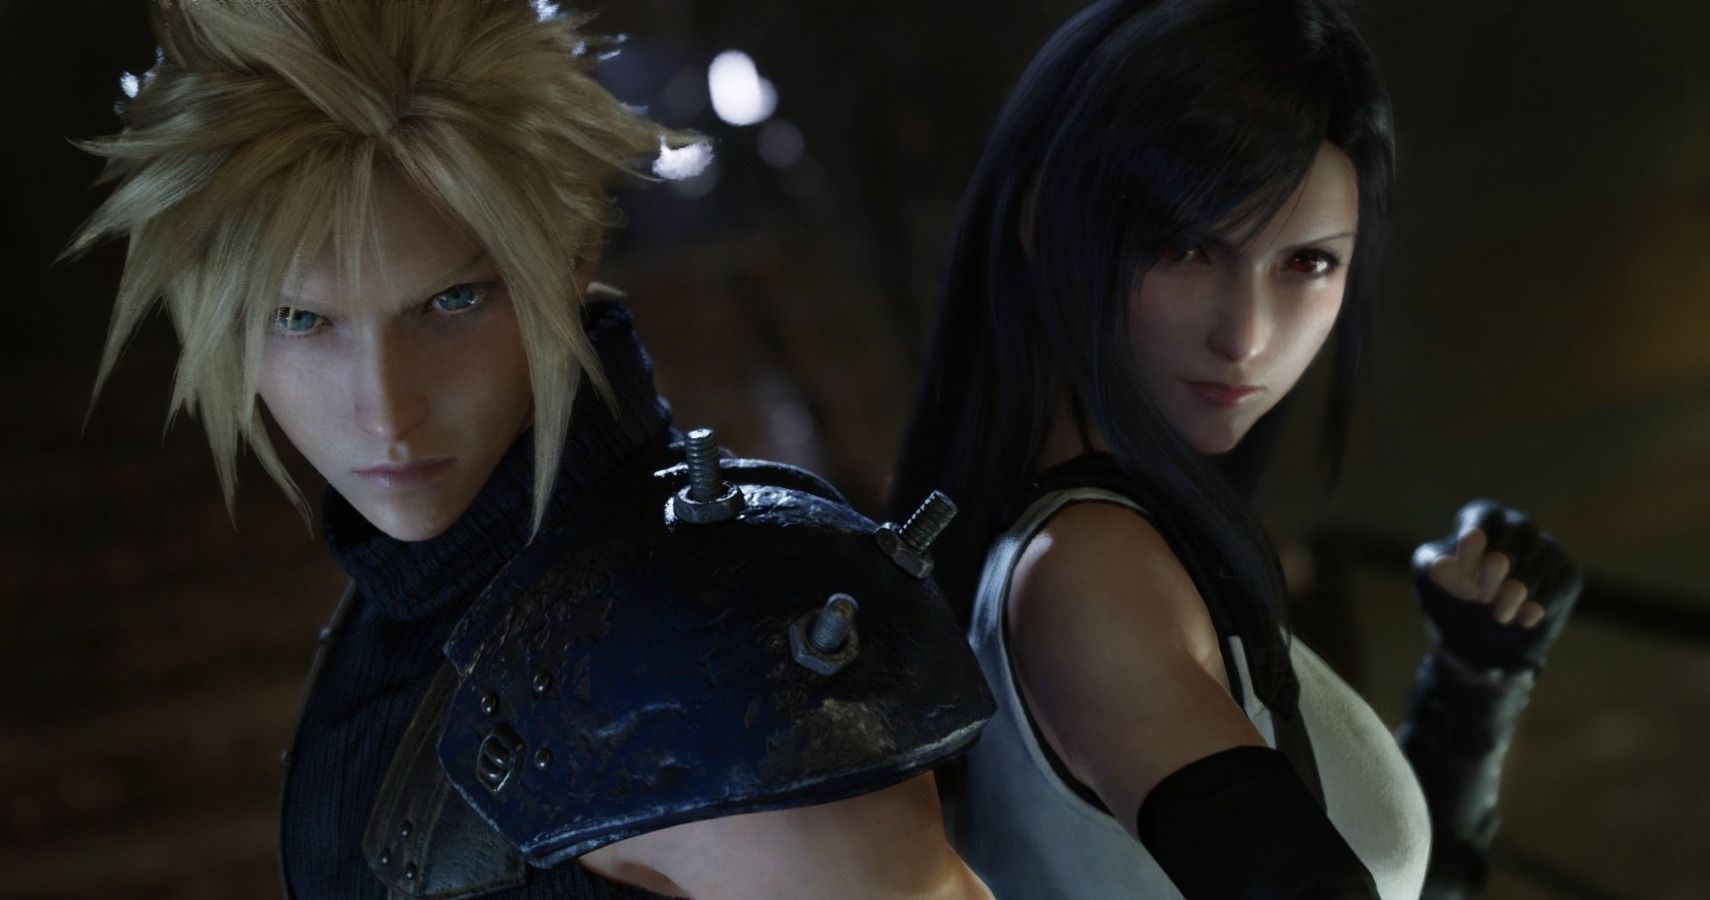 I Wish Final Fantasy 7 Remake Gave Newcomers More Of A Chance